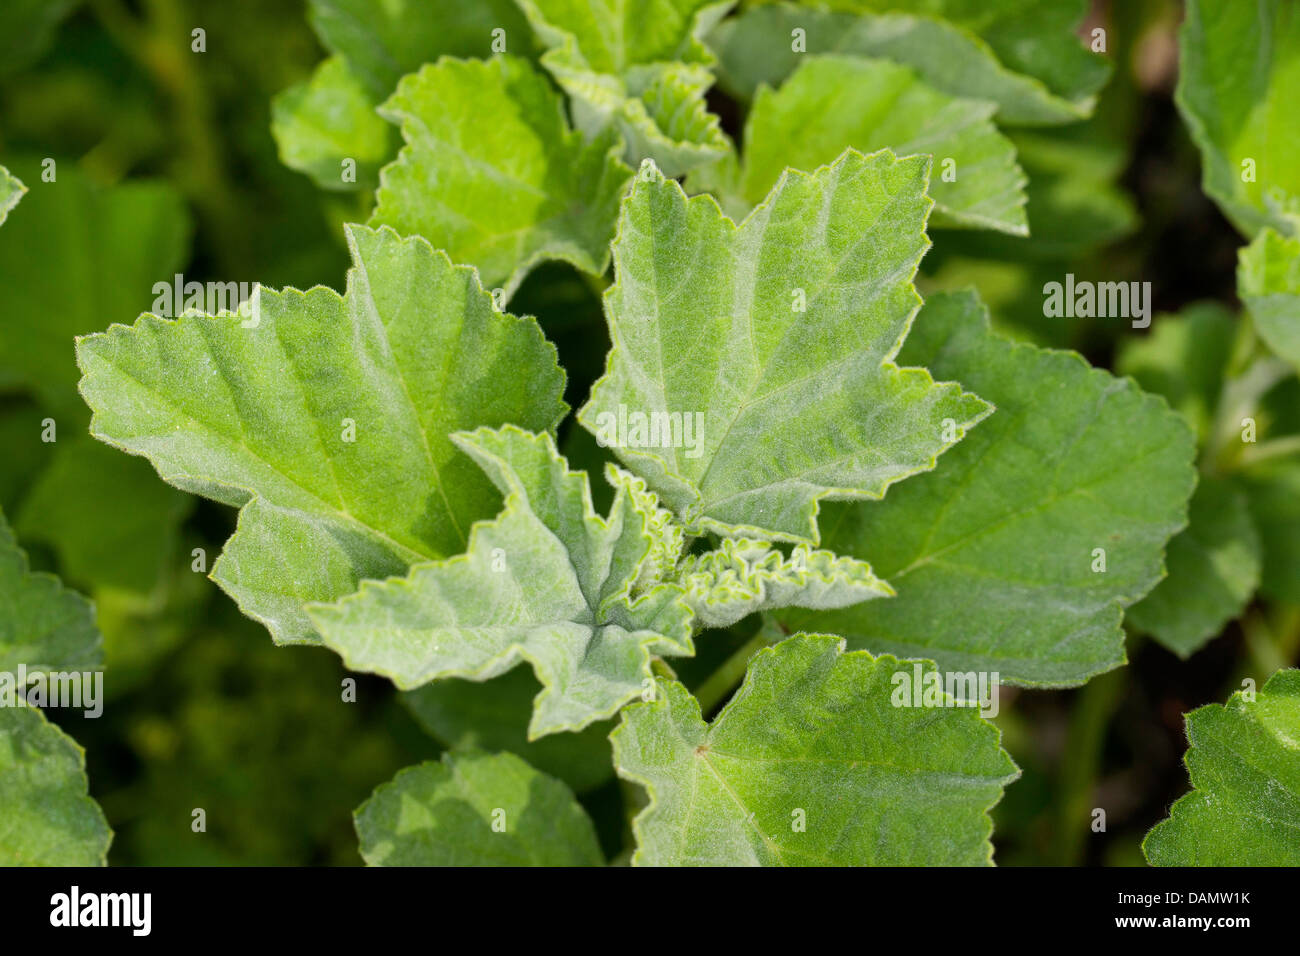 common marsh-mallow, common marshmallow (Althaea officinalis), leaves, Germany Stock Photo